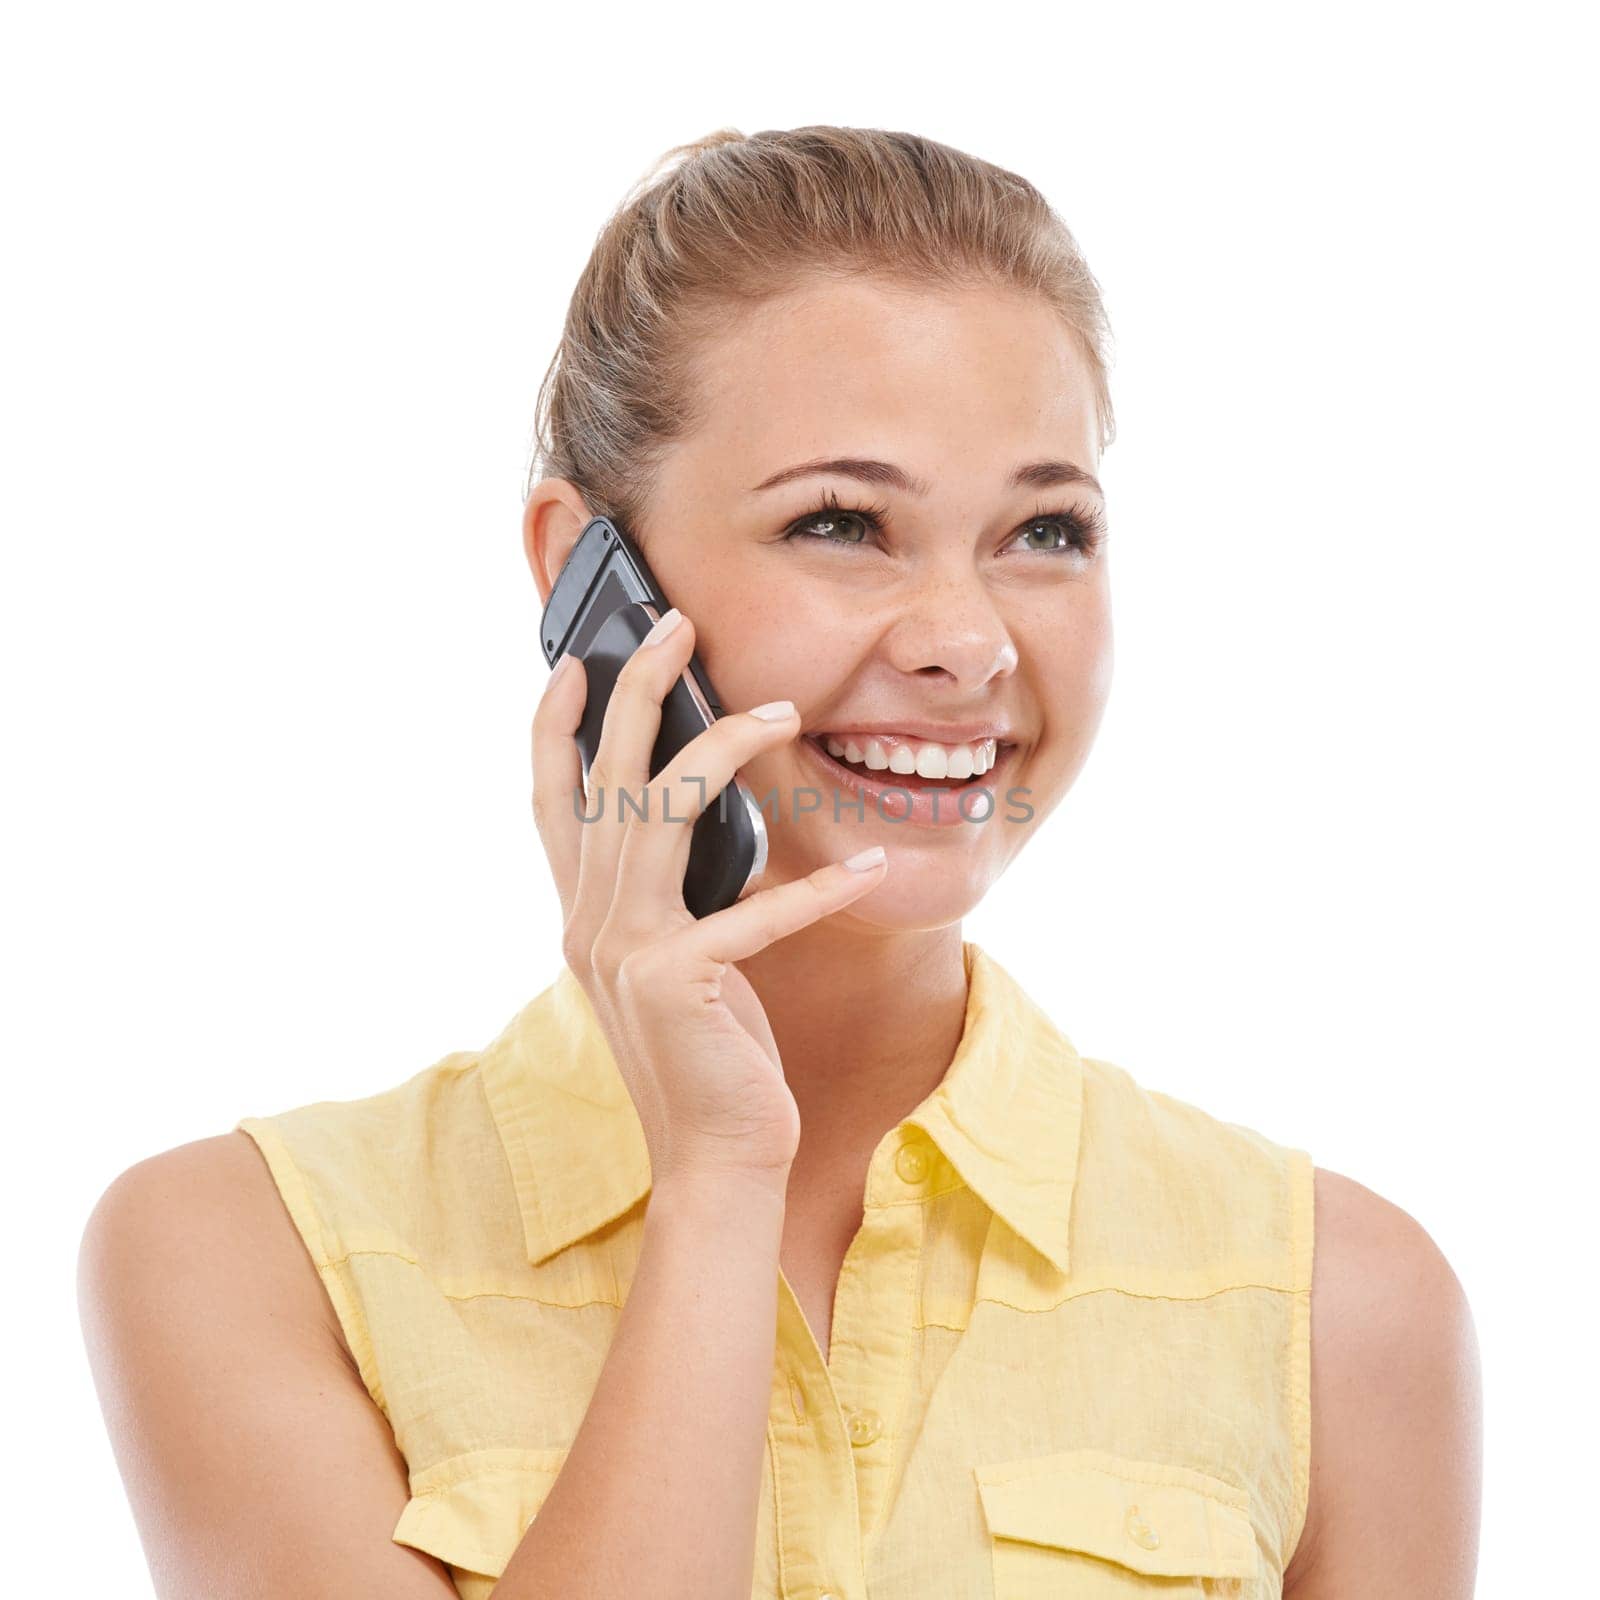 Phone call, listening or happy woman in studio or white background for communication or chat. Smile, funny or girl laughing in conversation or speaking of good news, ideas or feedback for networking.